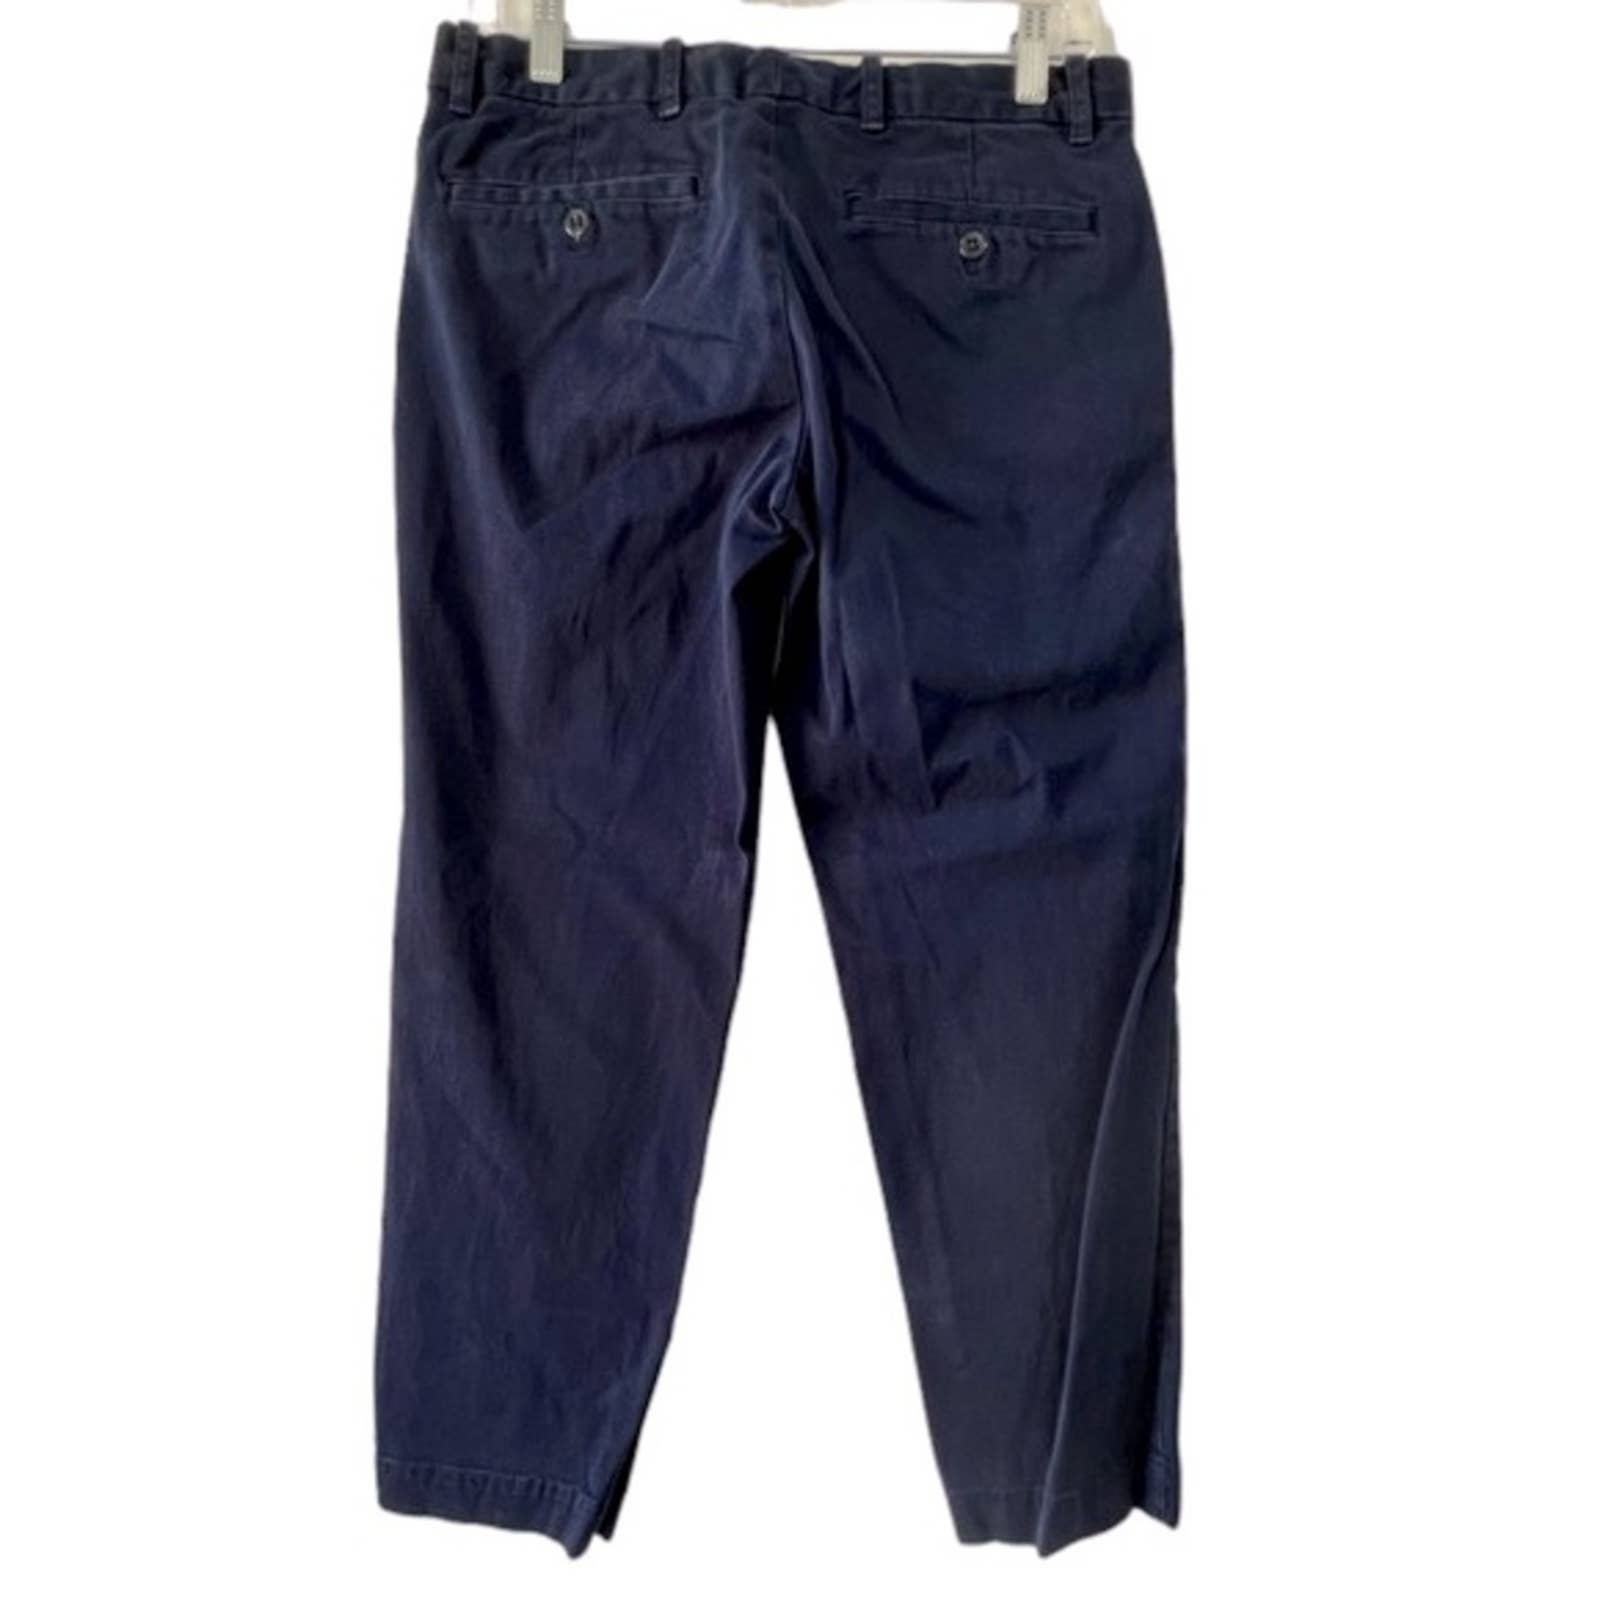 Wholesale price Ralph Lauren Sport Women´s Navy Flat Front Stretch Trousers Size 6 PpFdYUEpI Everyday Low Prices